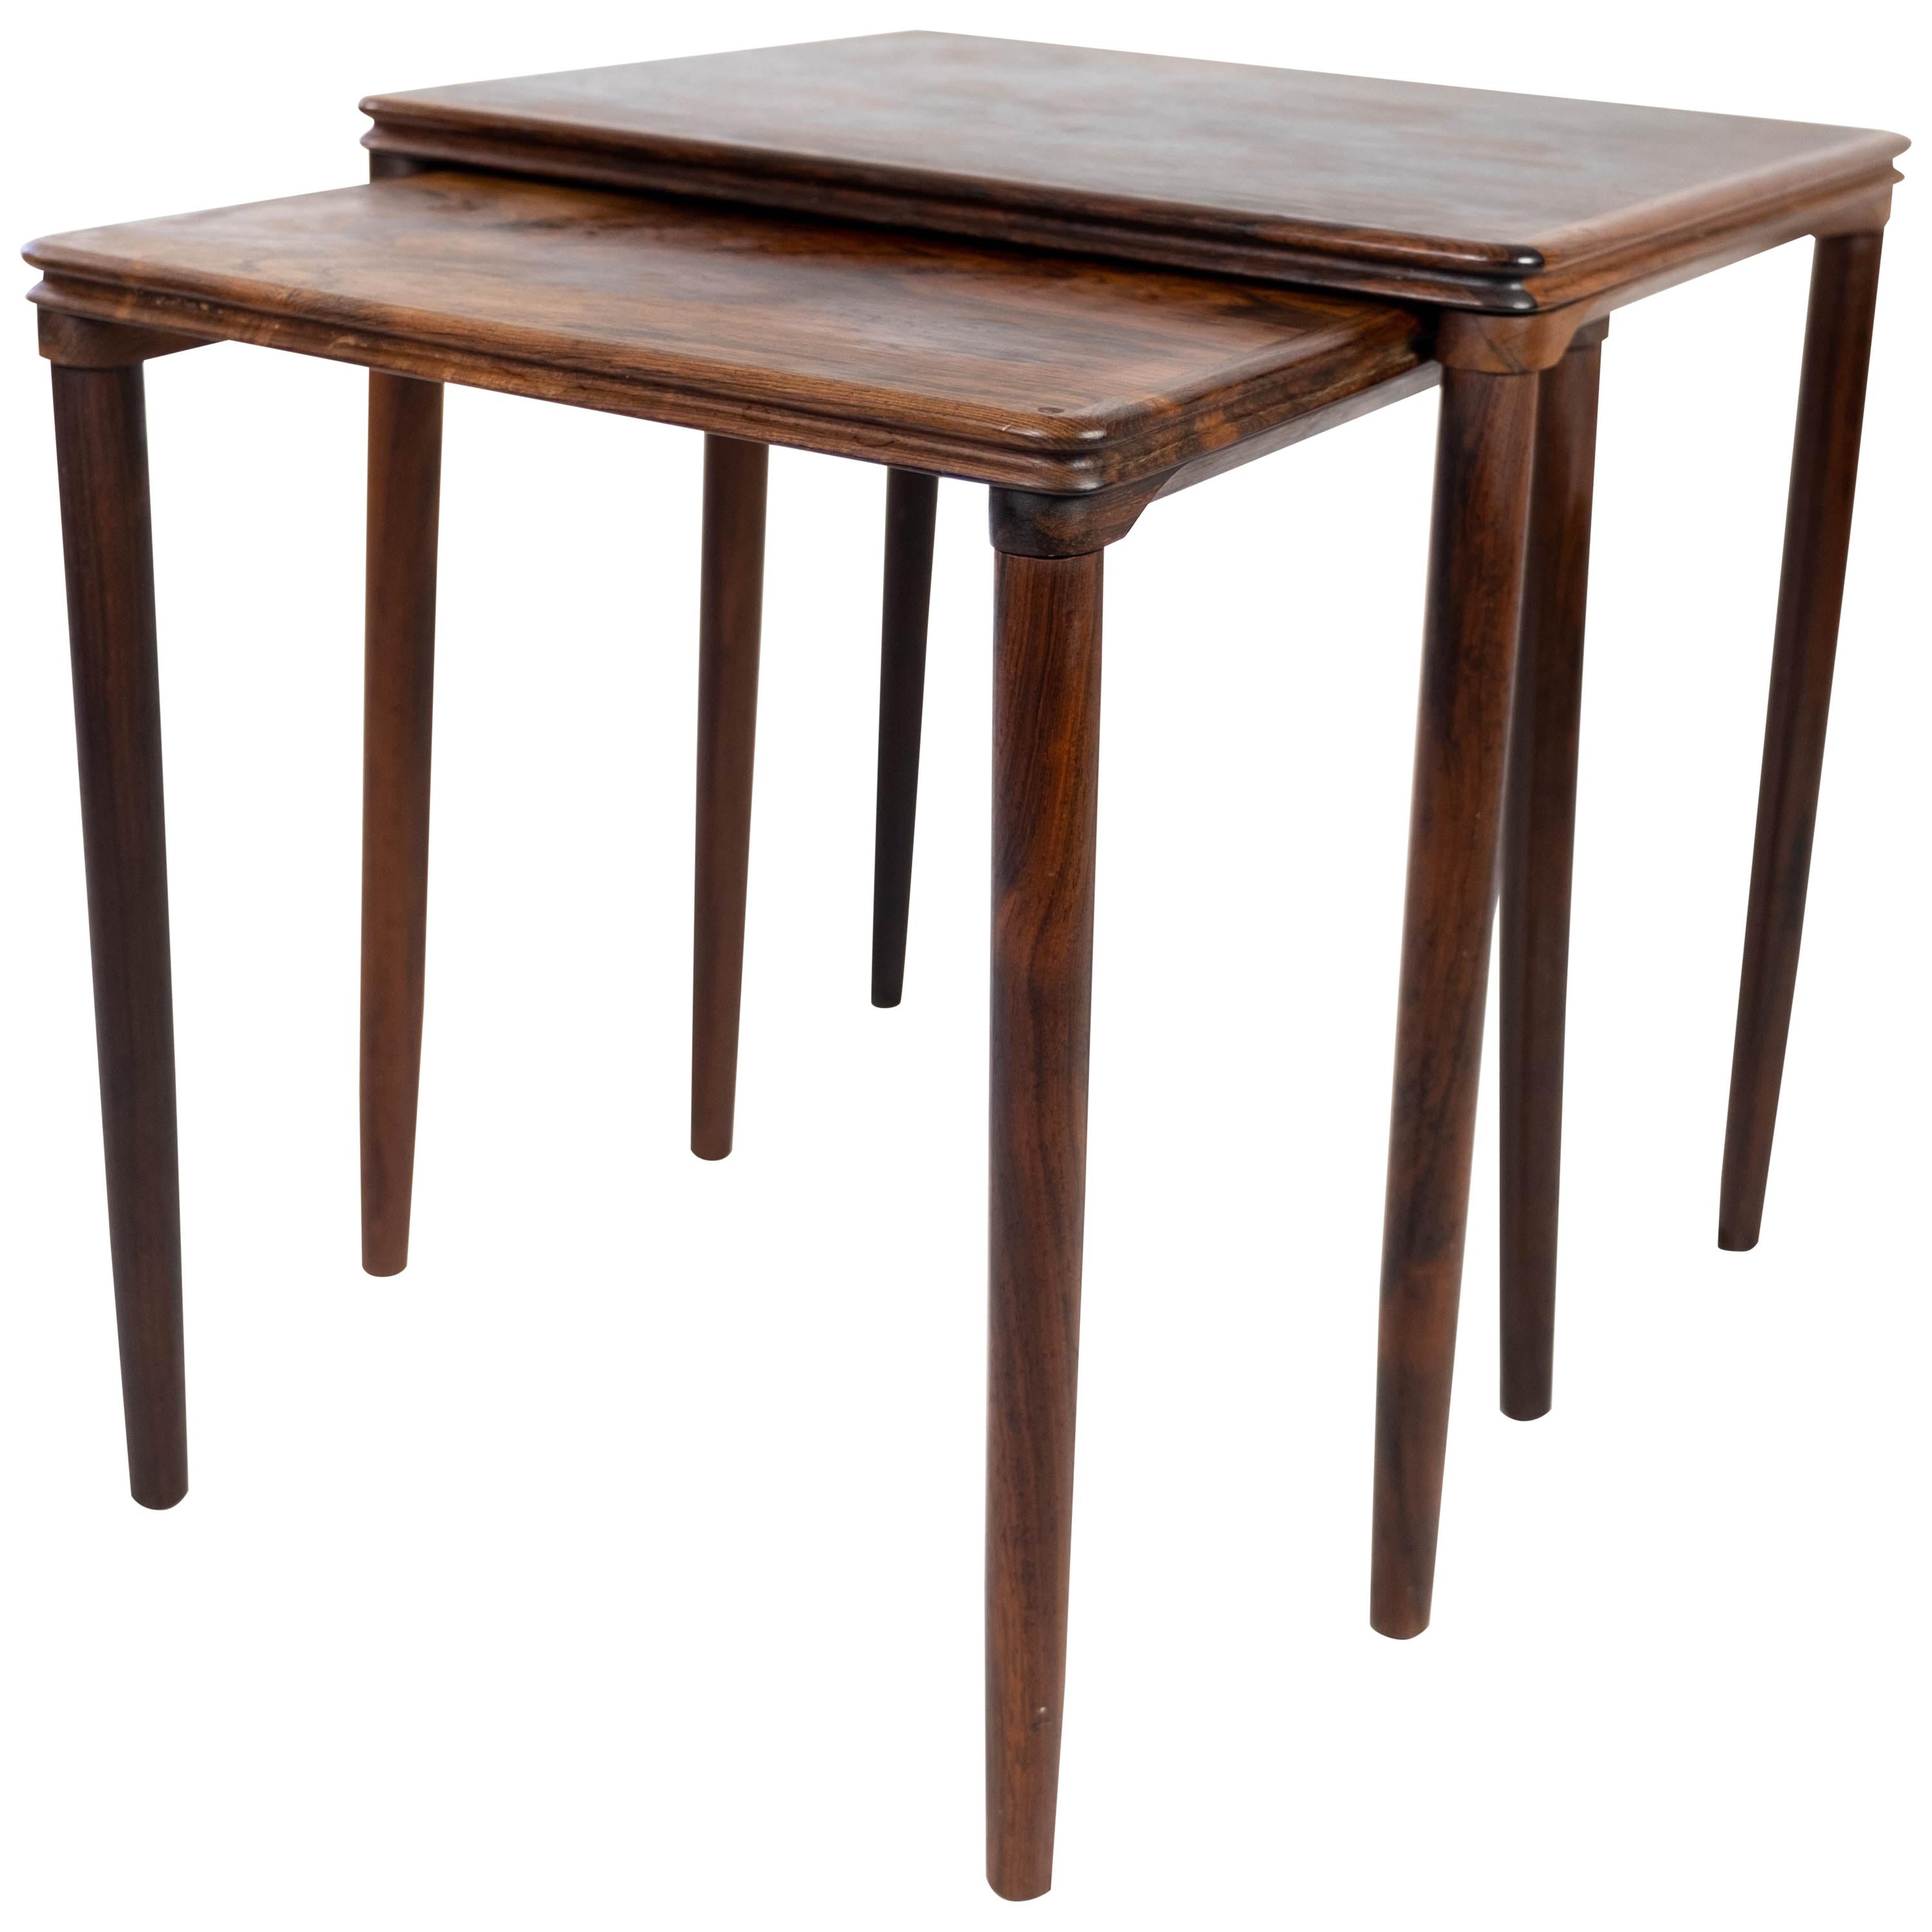 Nesting Tables in Rosewood of Danish Design from the 1960s